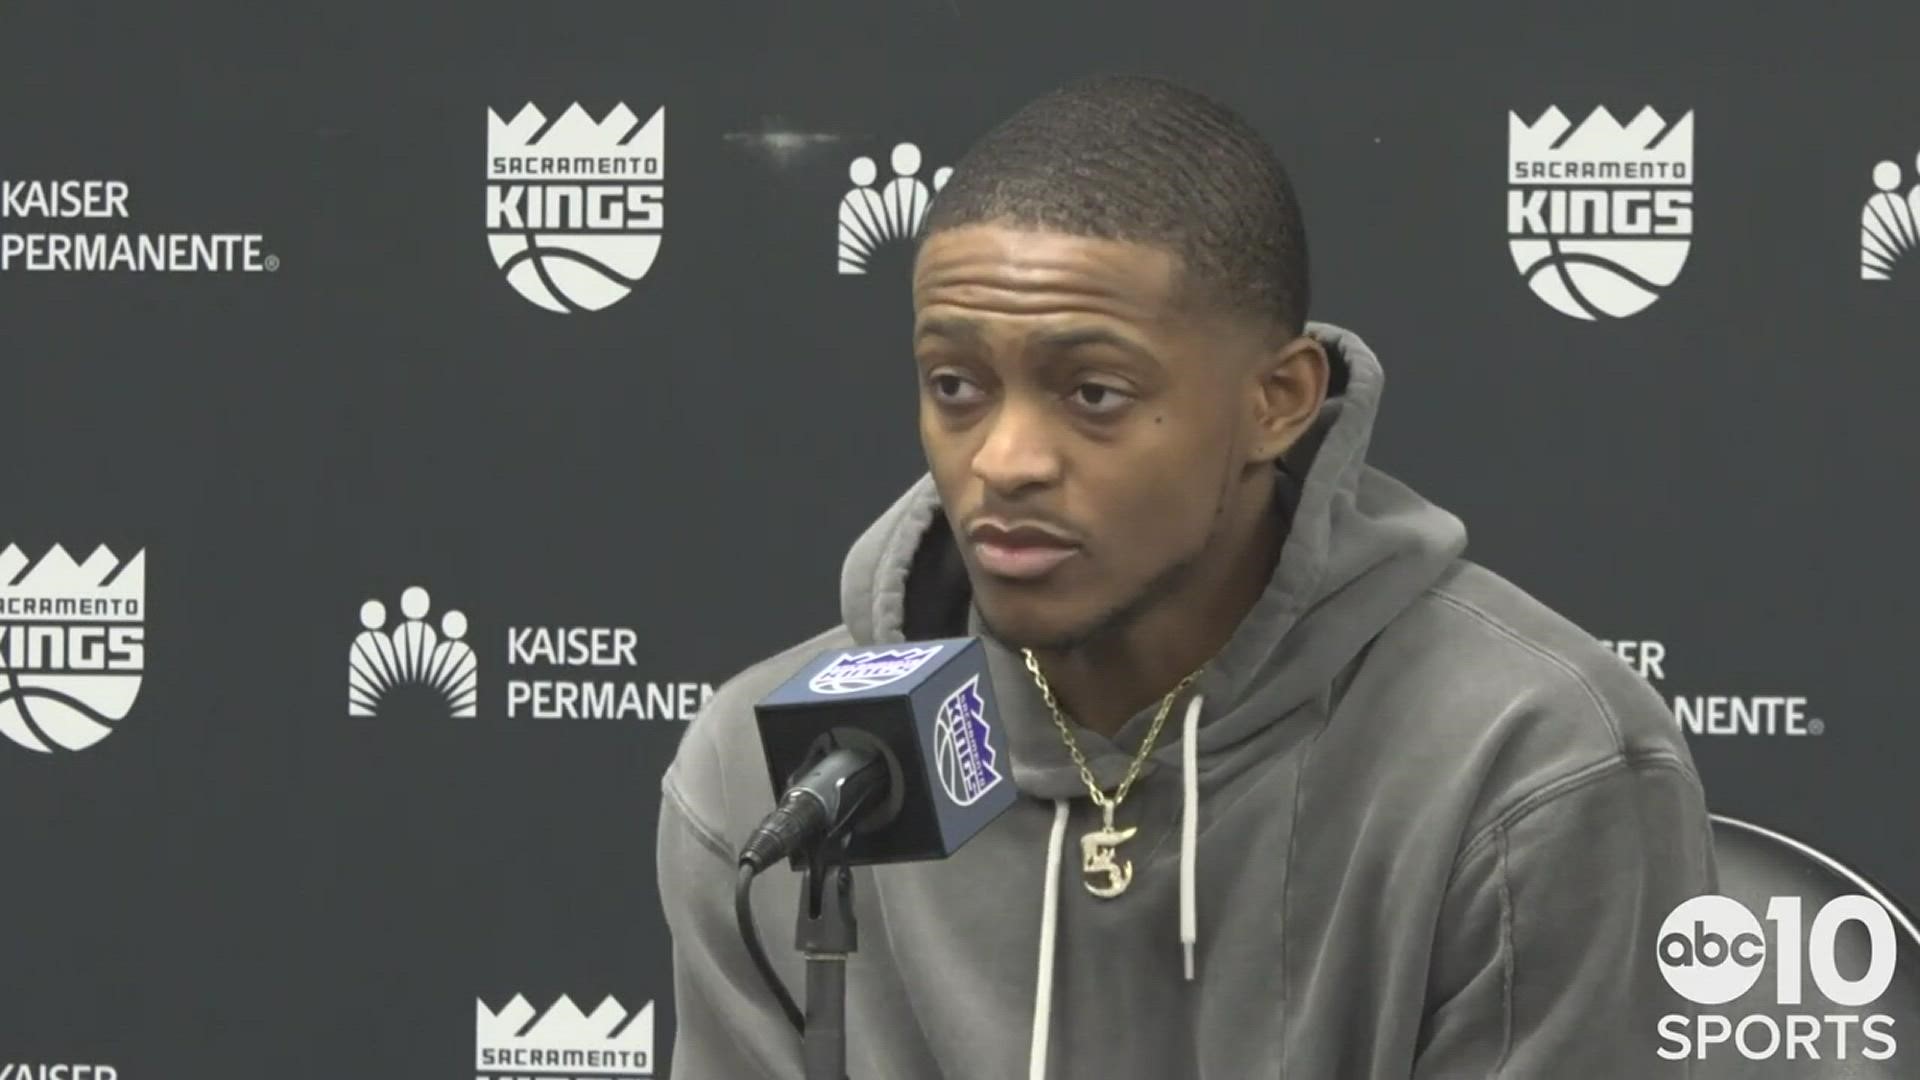 Kings PG De'Aaron Fox on Wednesday's 125-116 victory over the Los Angeles Lakers and his 29 point performance to lead Sacramento in snapping a five game losing skid.